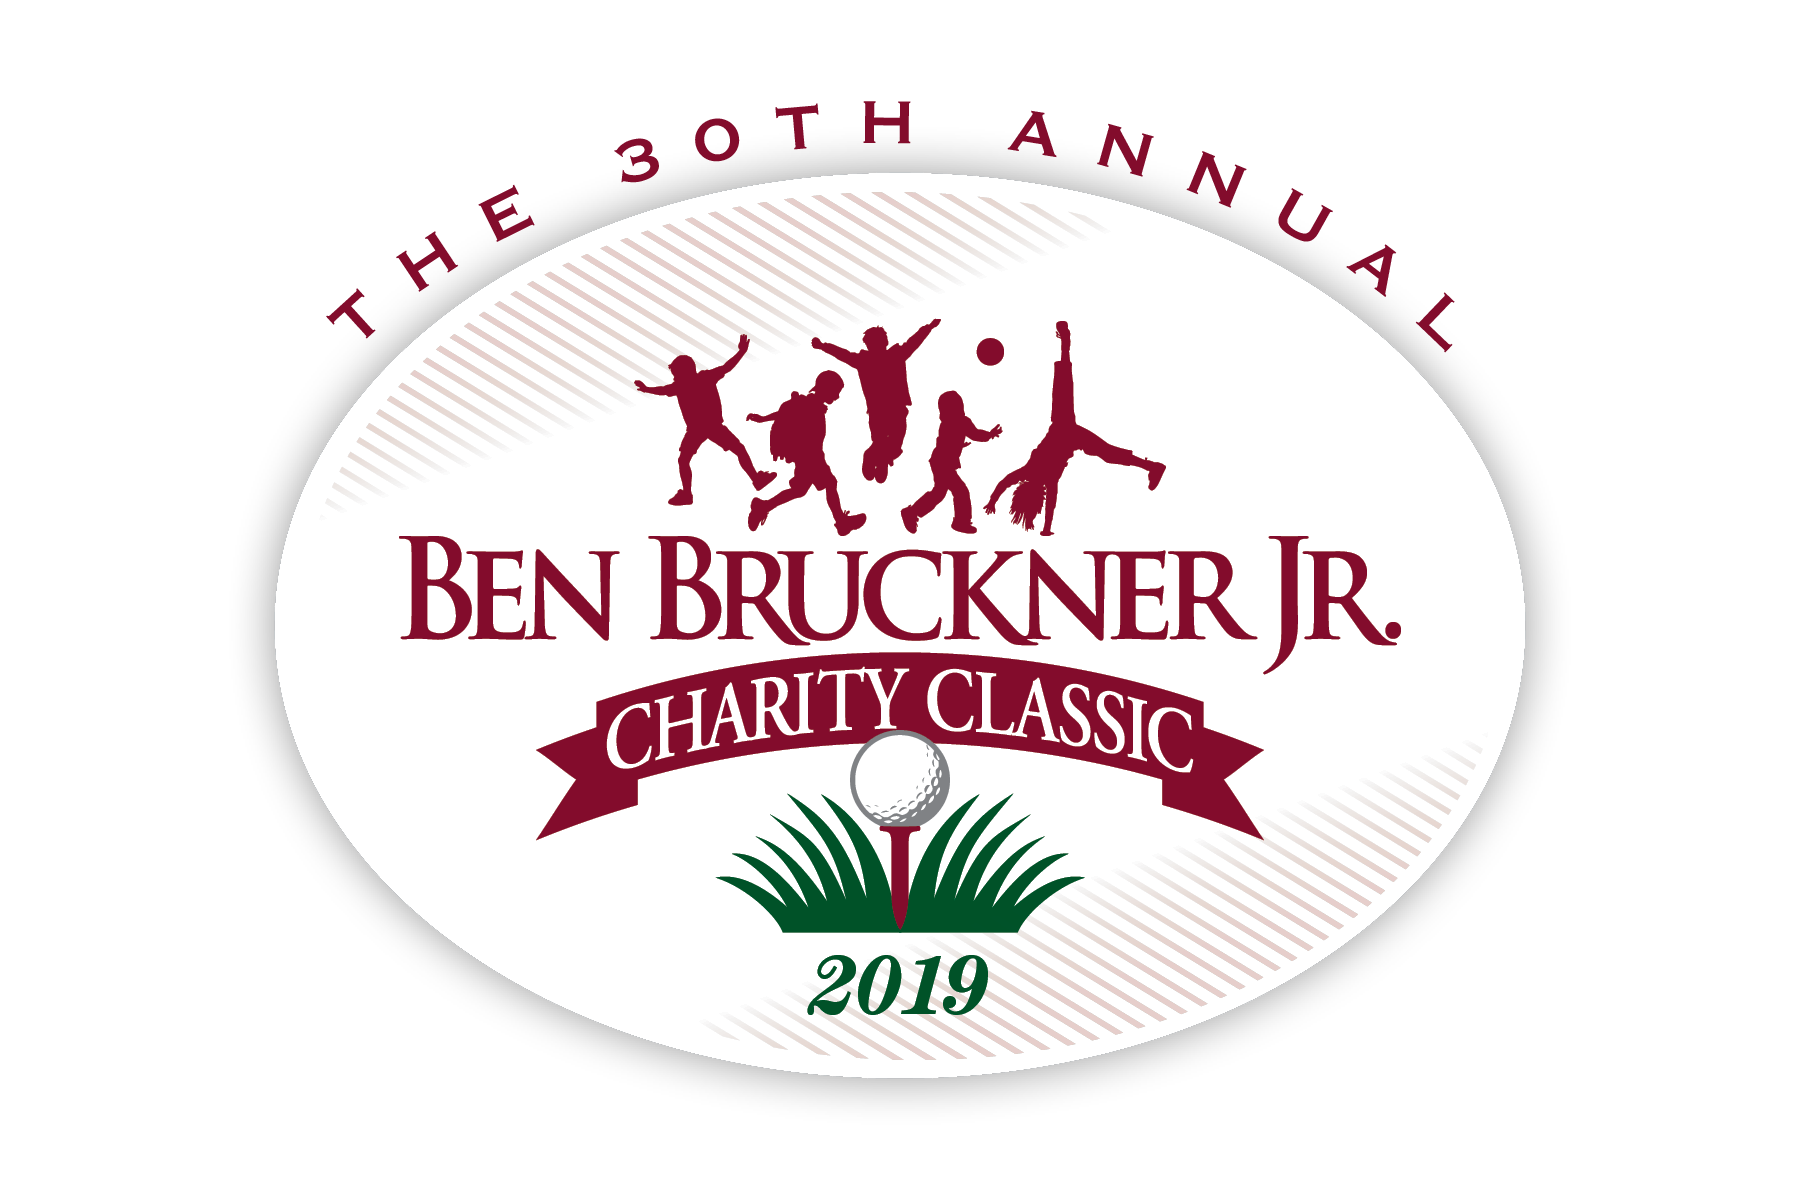 Results of 30th Annual Ben Bruckner Jr Charity Classic cover image